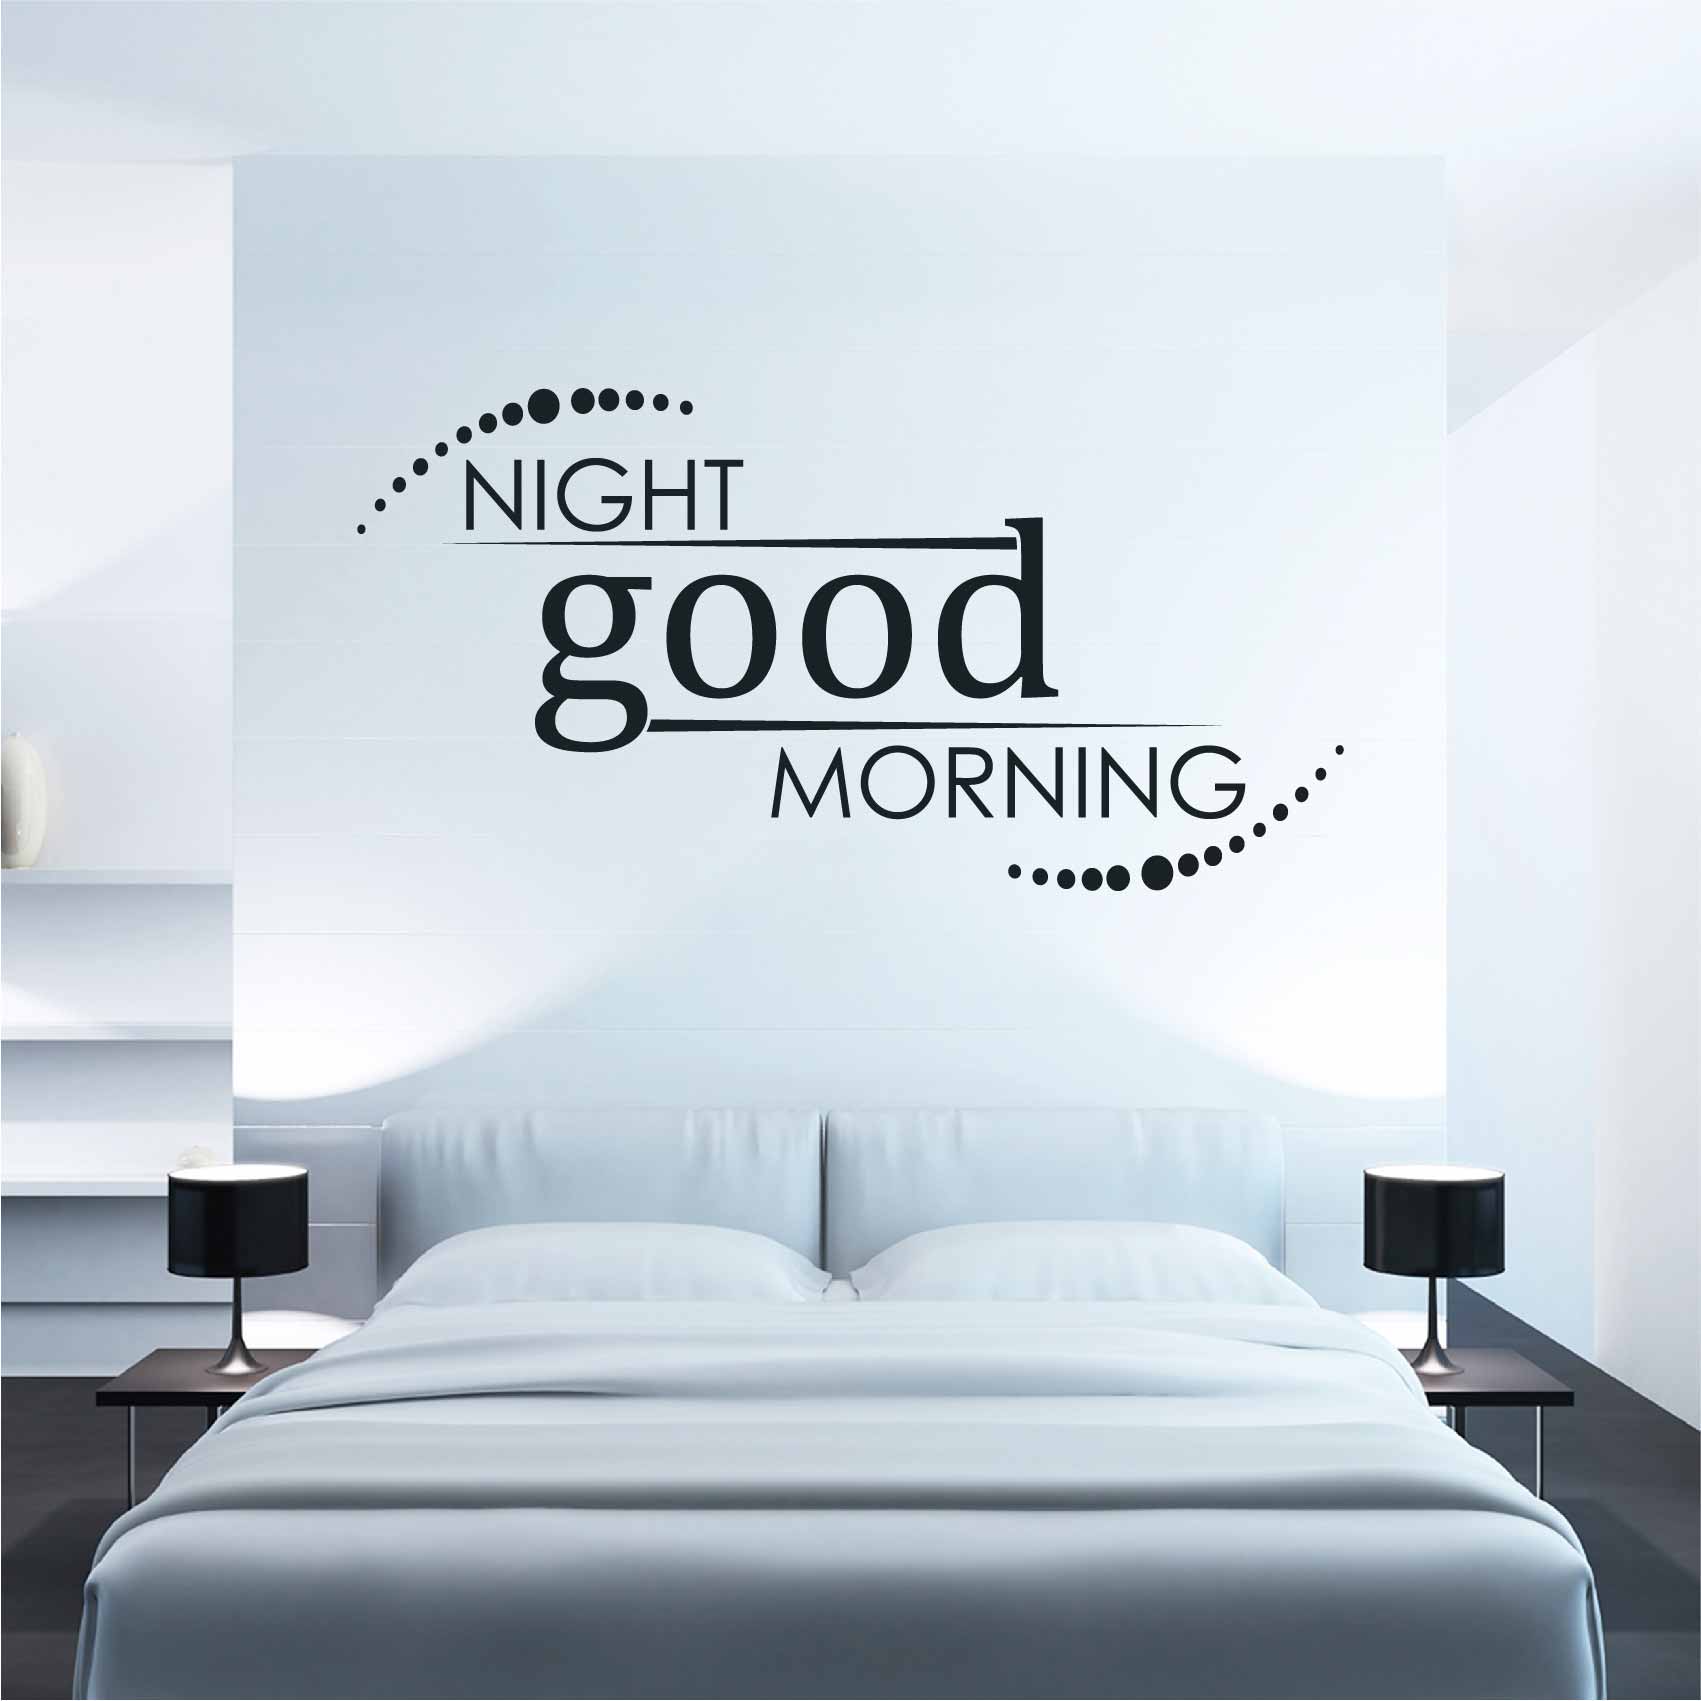 stickers-good-night-good-morning-ref17chambre-autocollant-muraux-sticker-mural-deco-adulte-chambre-a-coucher-parents-couple-decoration